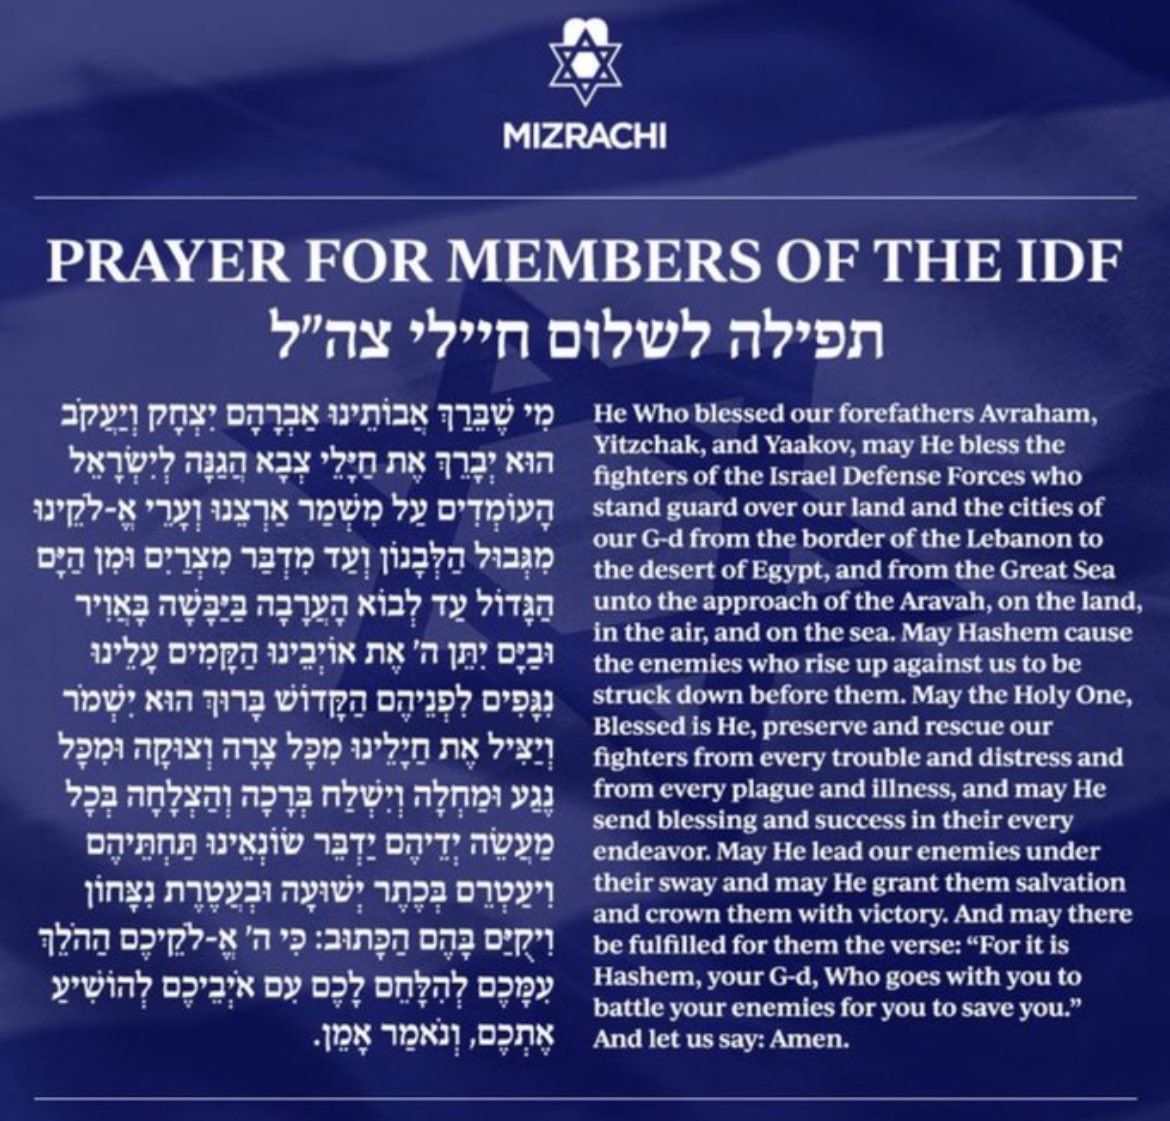 11 IDF soldiers were injured this week fighting in Gaza, 5 of them are critically injured and fighting for their lives. 

Take a moment and pray for them, please.